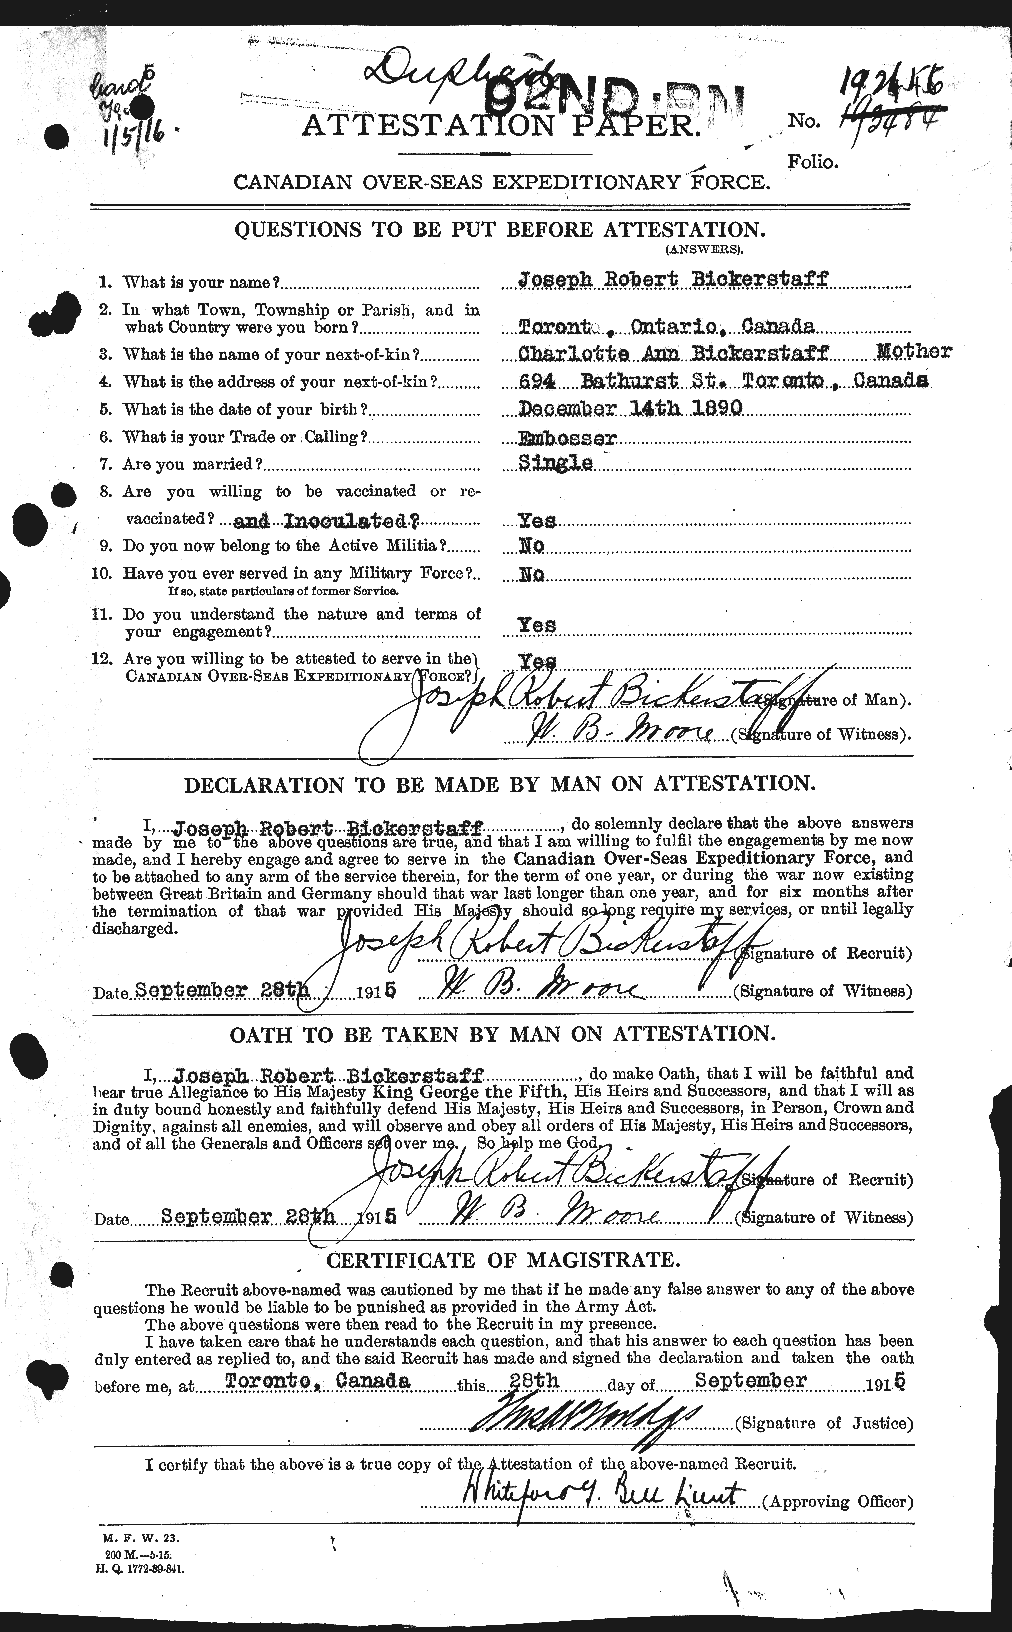 Personnel Records of the First World War - CEF 244950a